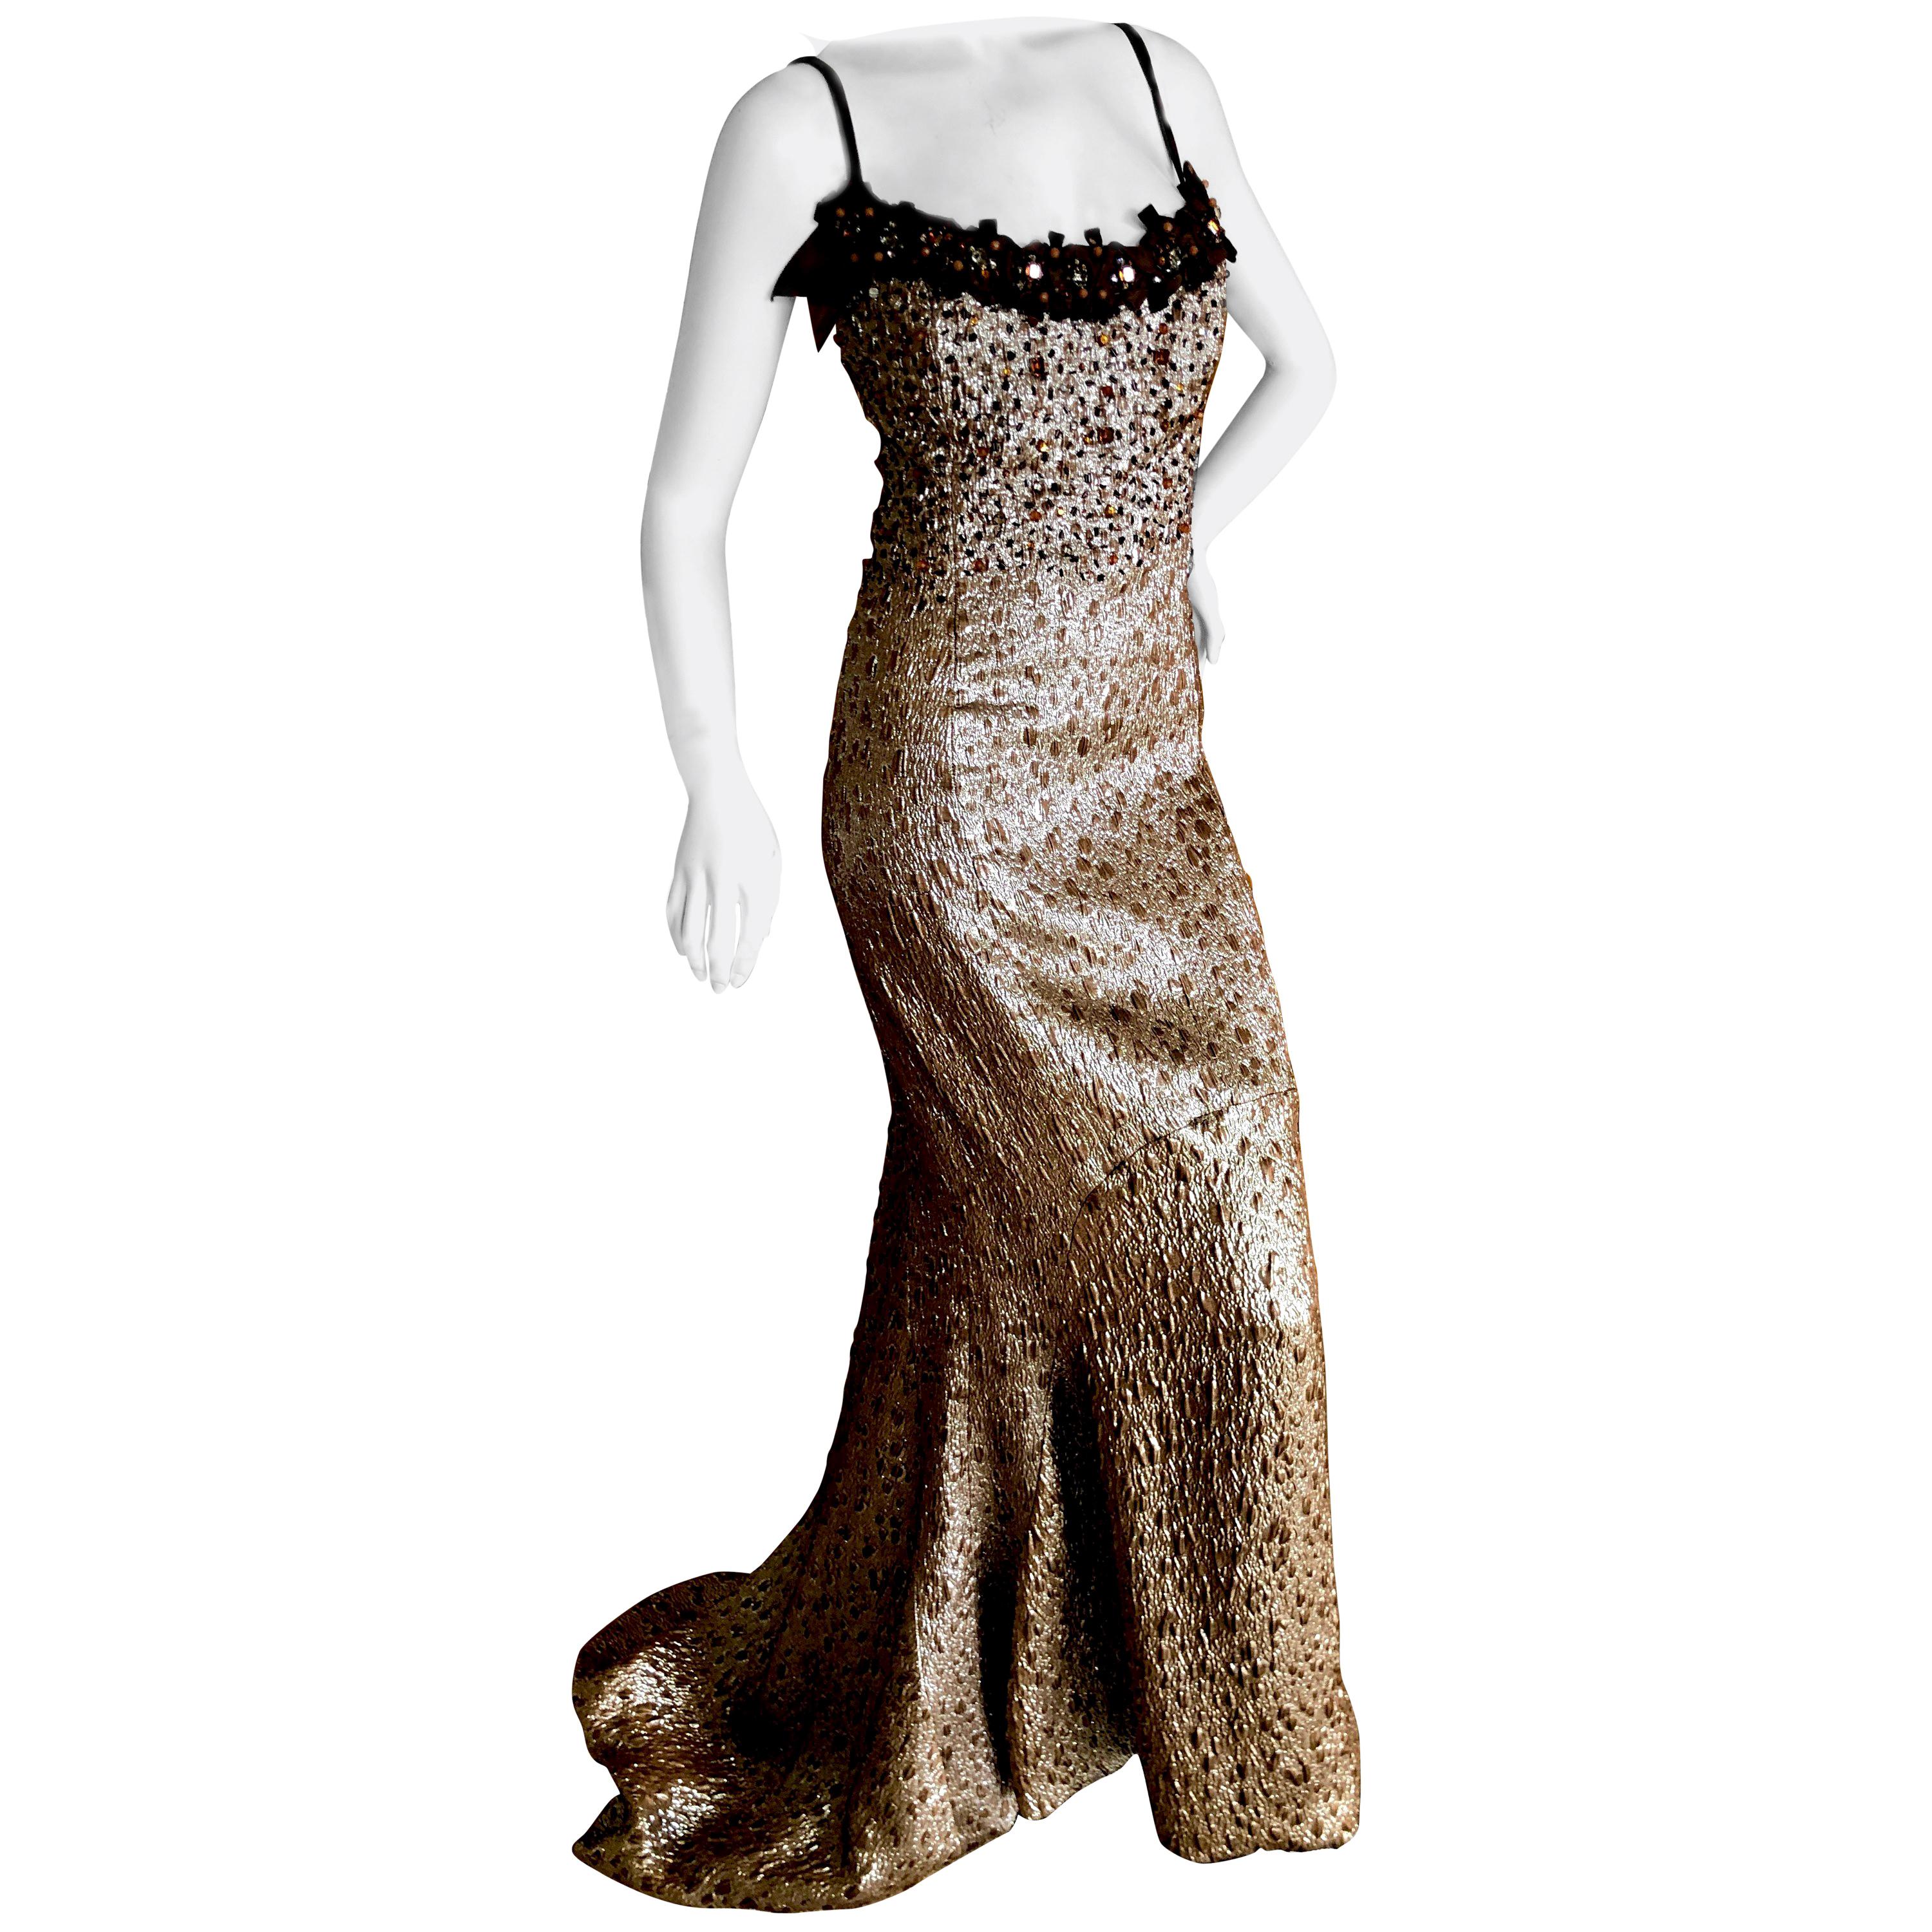 Carolina Herrera Gold Embellished Evening Gown in Hard to Find Size 14 For Sale